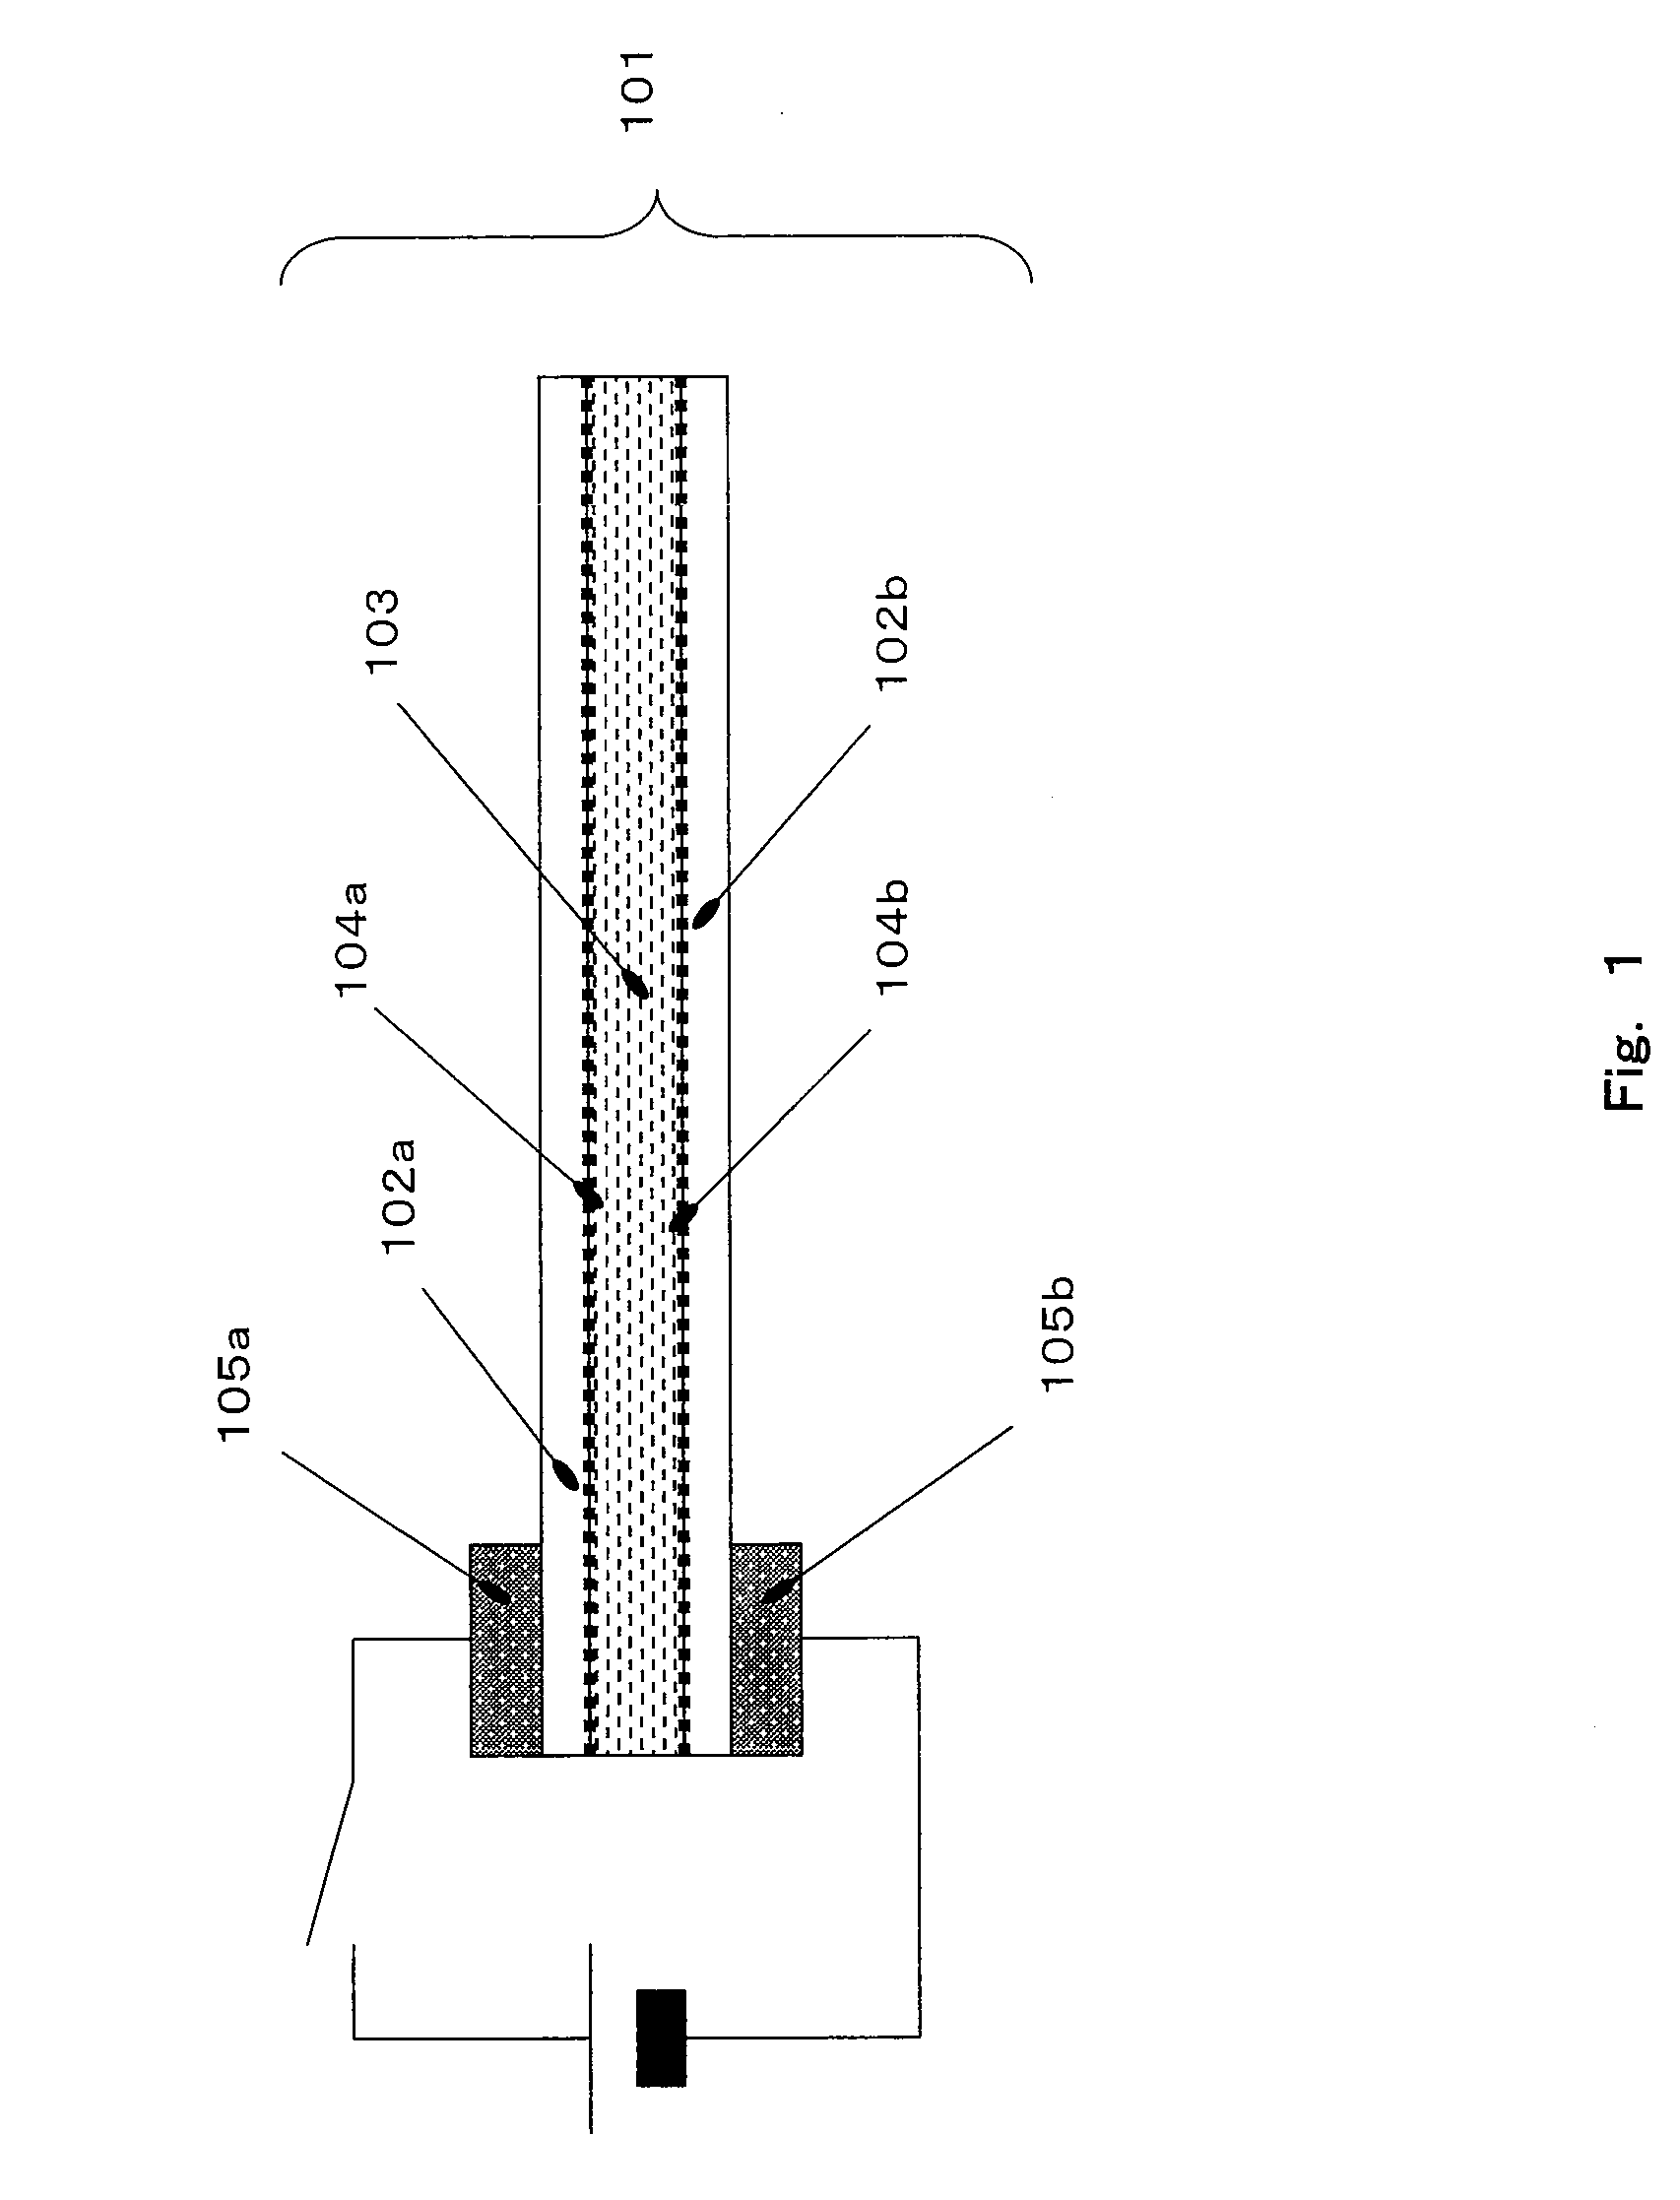 Electrically conductive polymer actuator and method for manufacturing the same